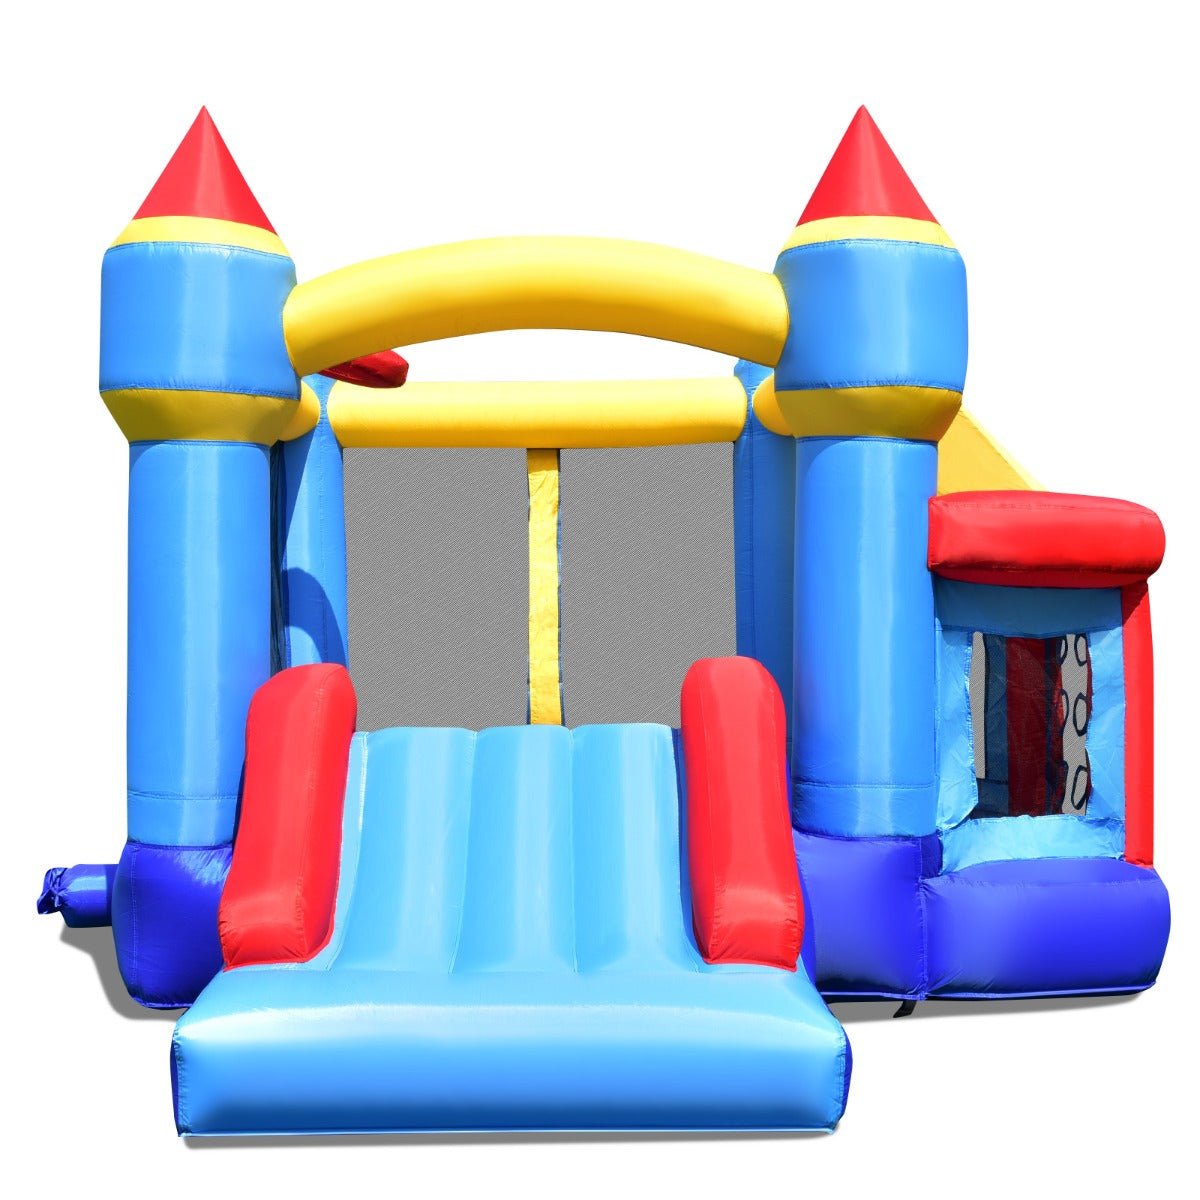 Adventure Awaits: Inflatable Jumping Castle with Slide for Kid's Play